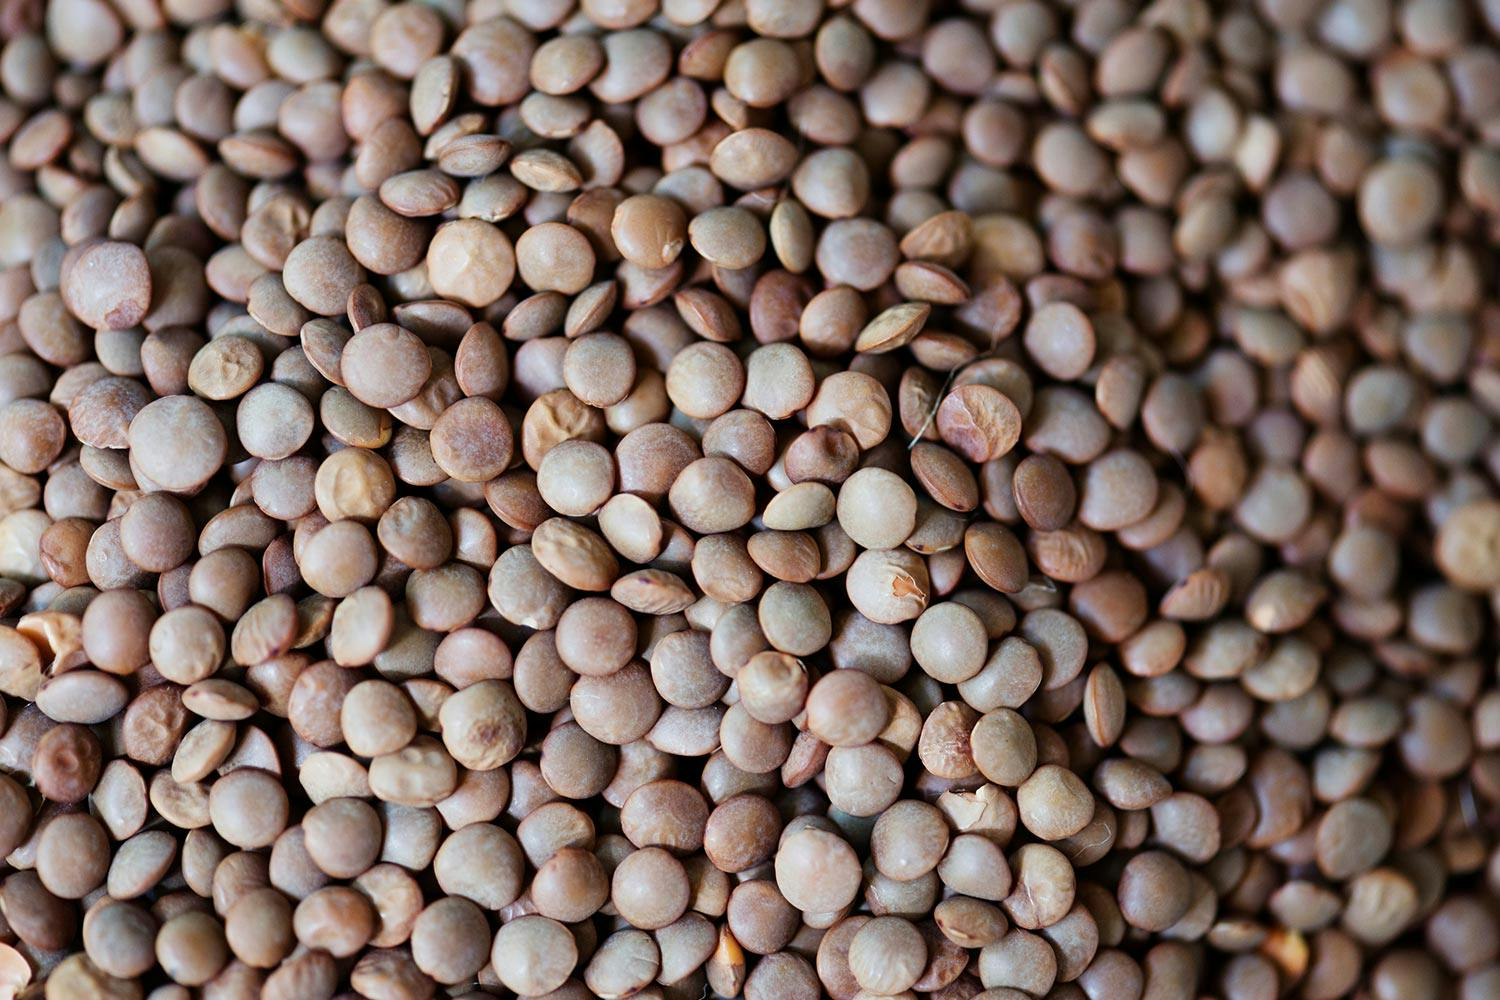 A pile of dry lentils appear in various shades of reddish brown.